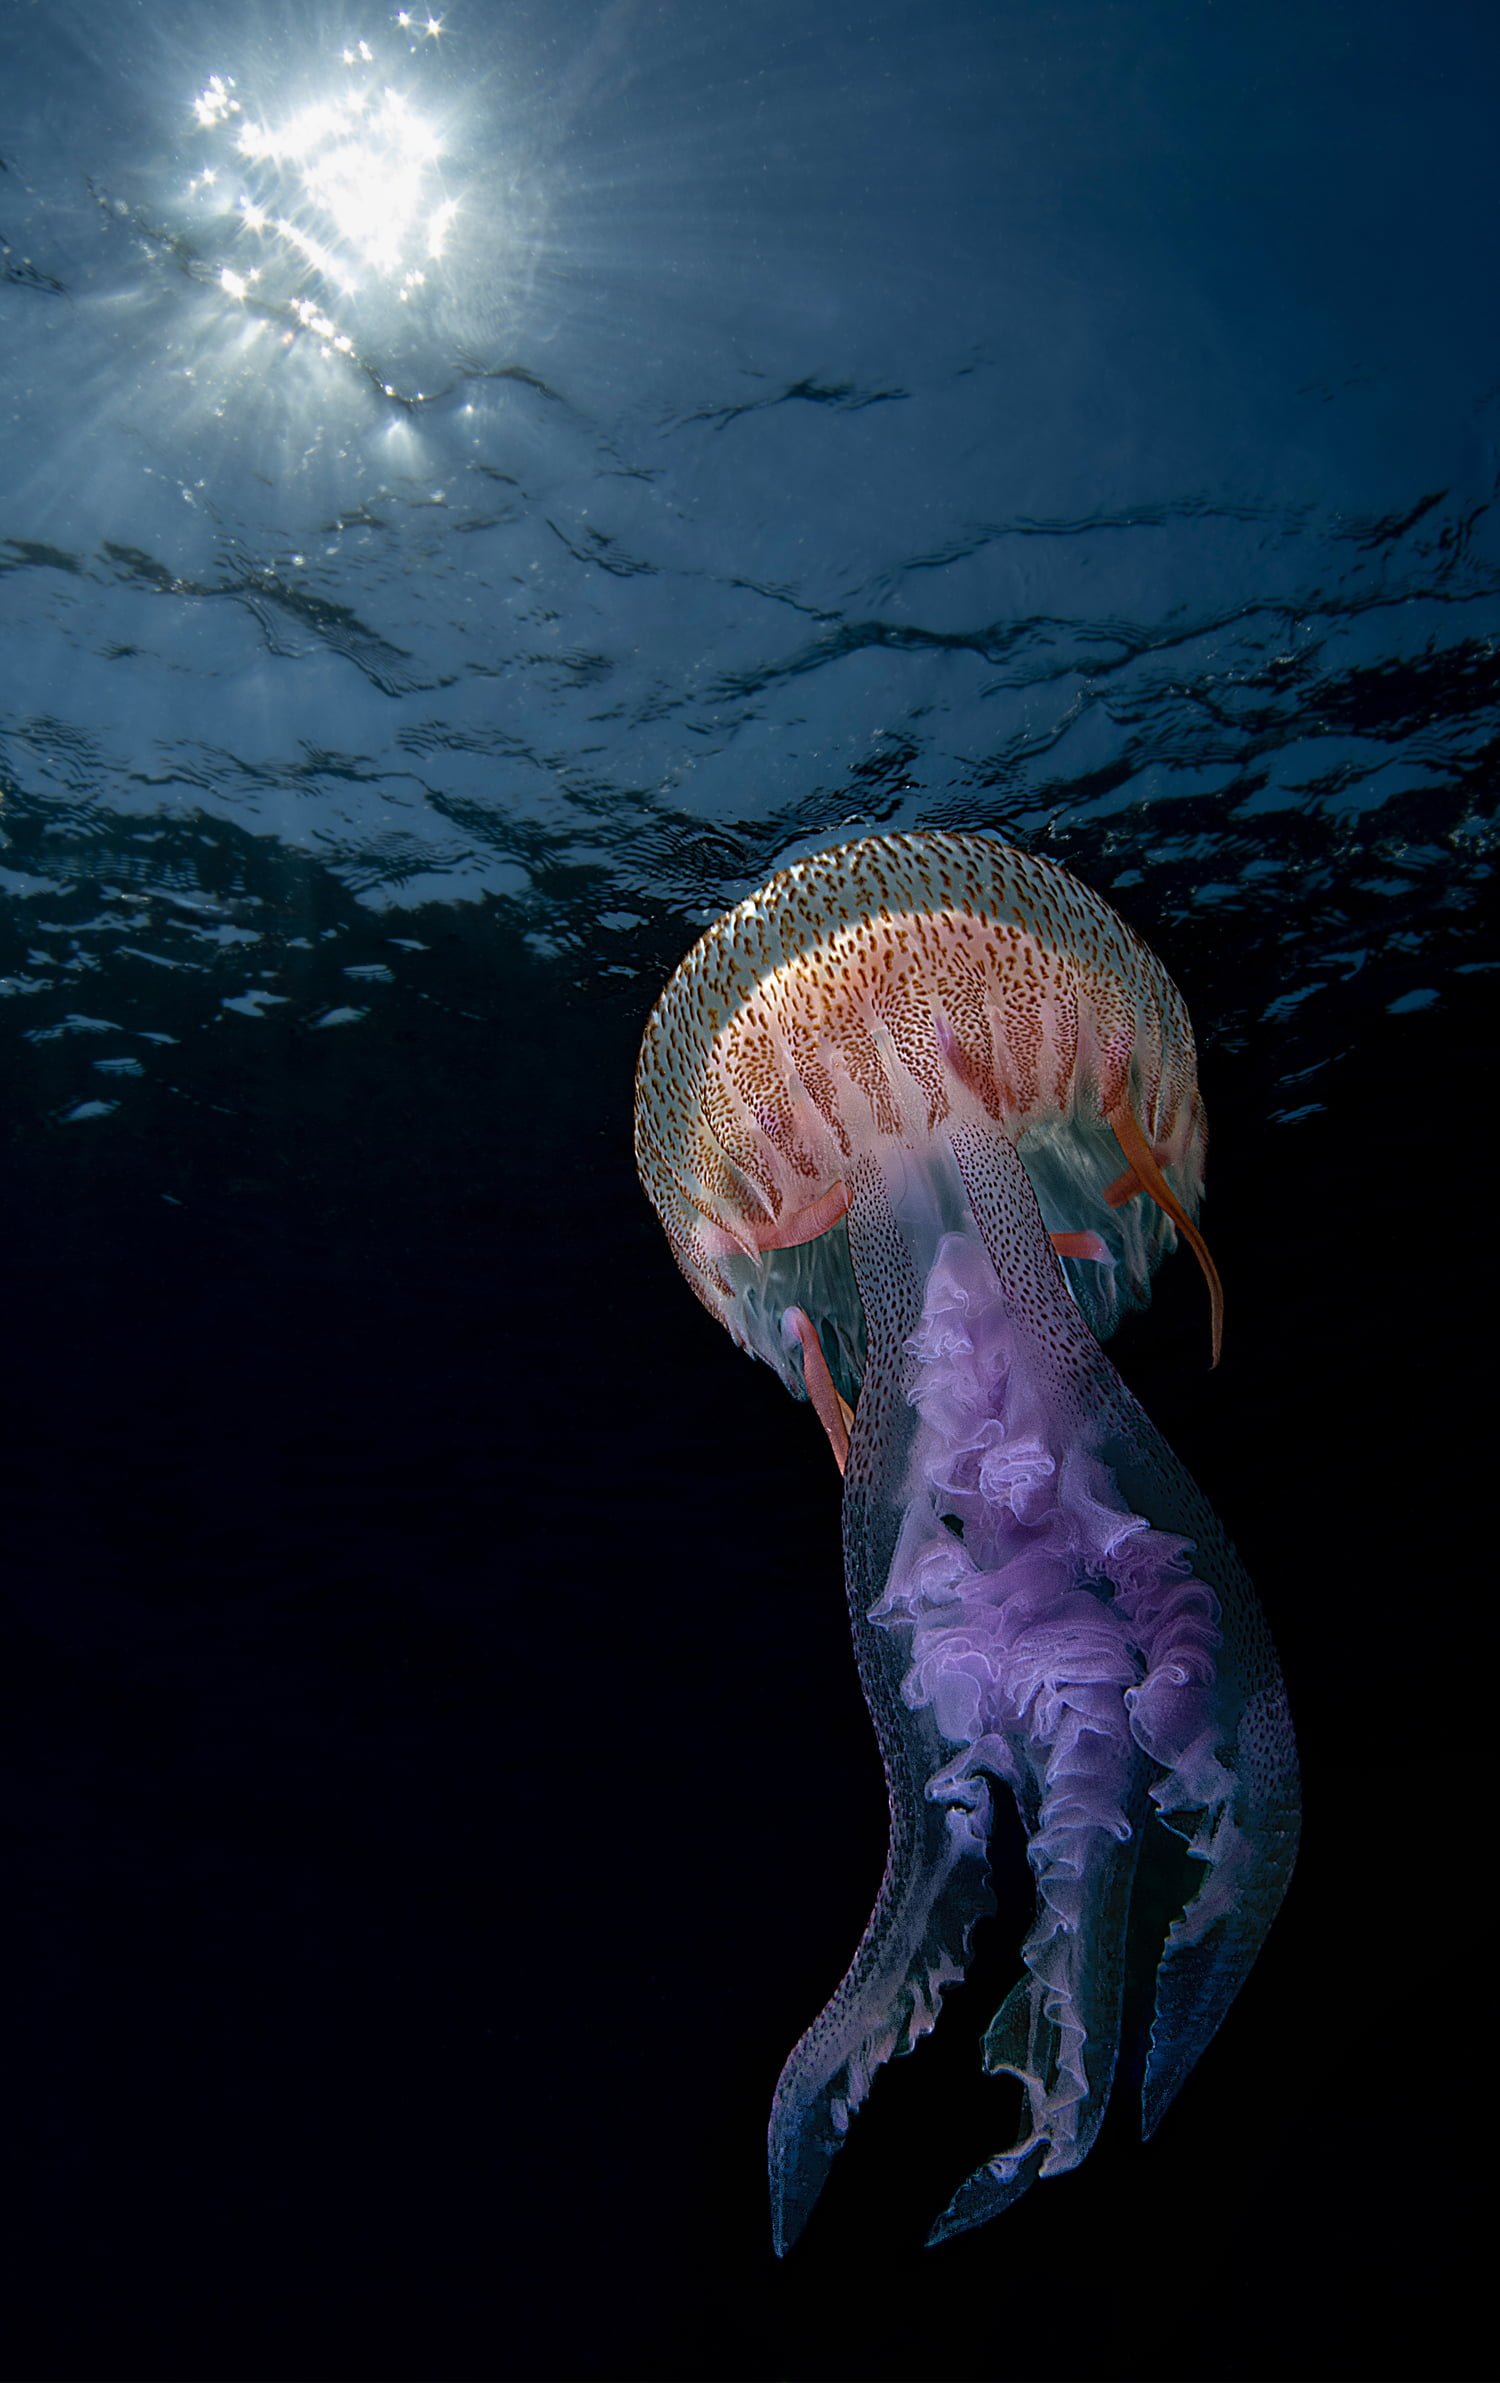 A mauve stinger jellyfish (Pelagia nocticula) floats off the coast of Noli, Italy. The Latin name is derived from the jellyfish’s ability to glow in the dark. World Nature Photography Award